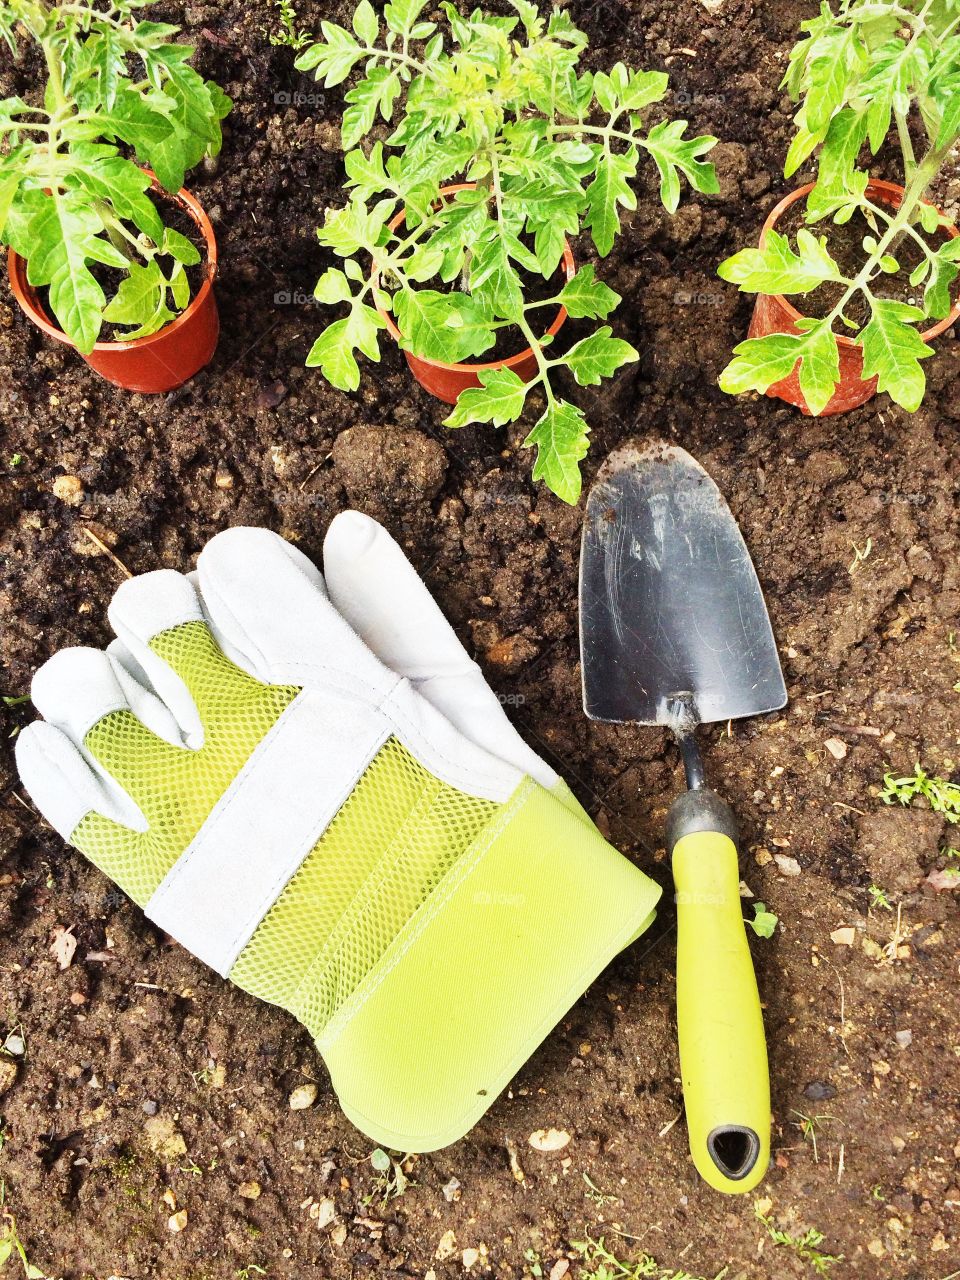 Tomato plants and garden tools. Tomato plants and garden tools